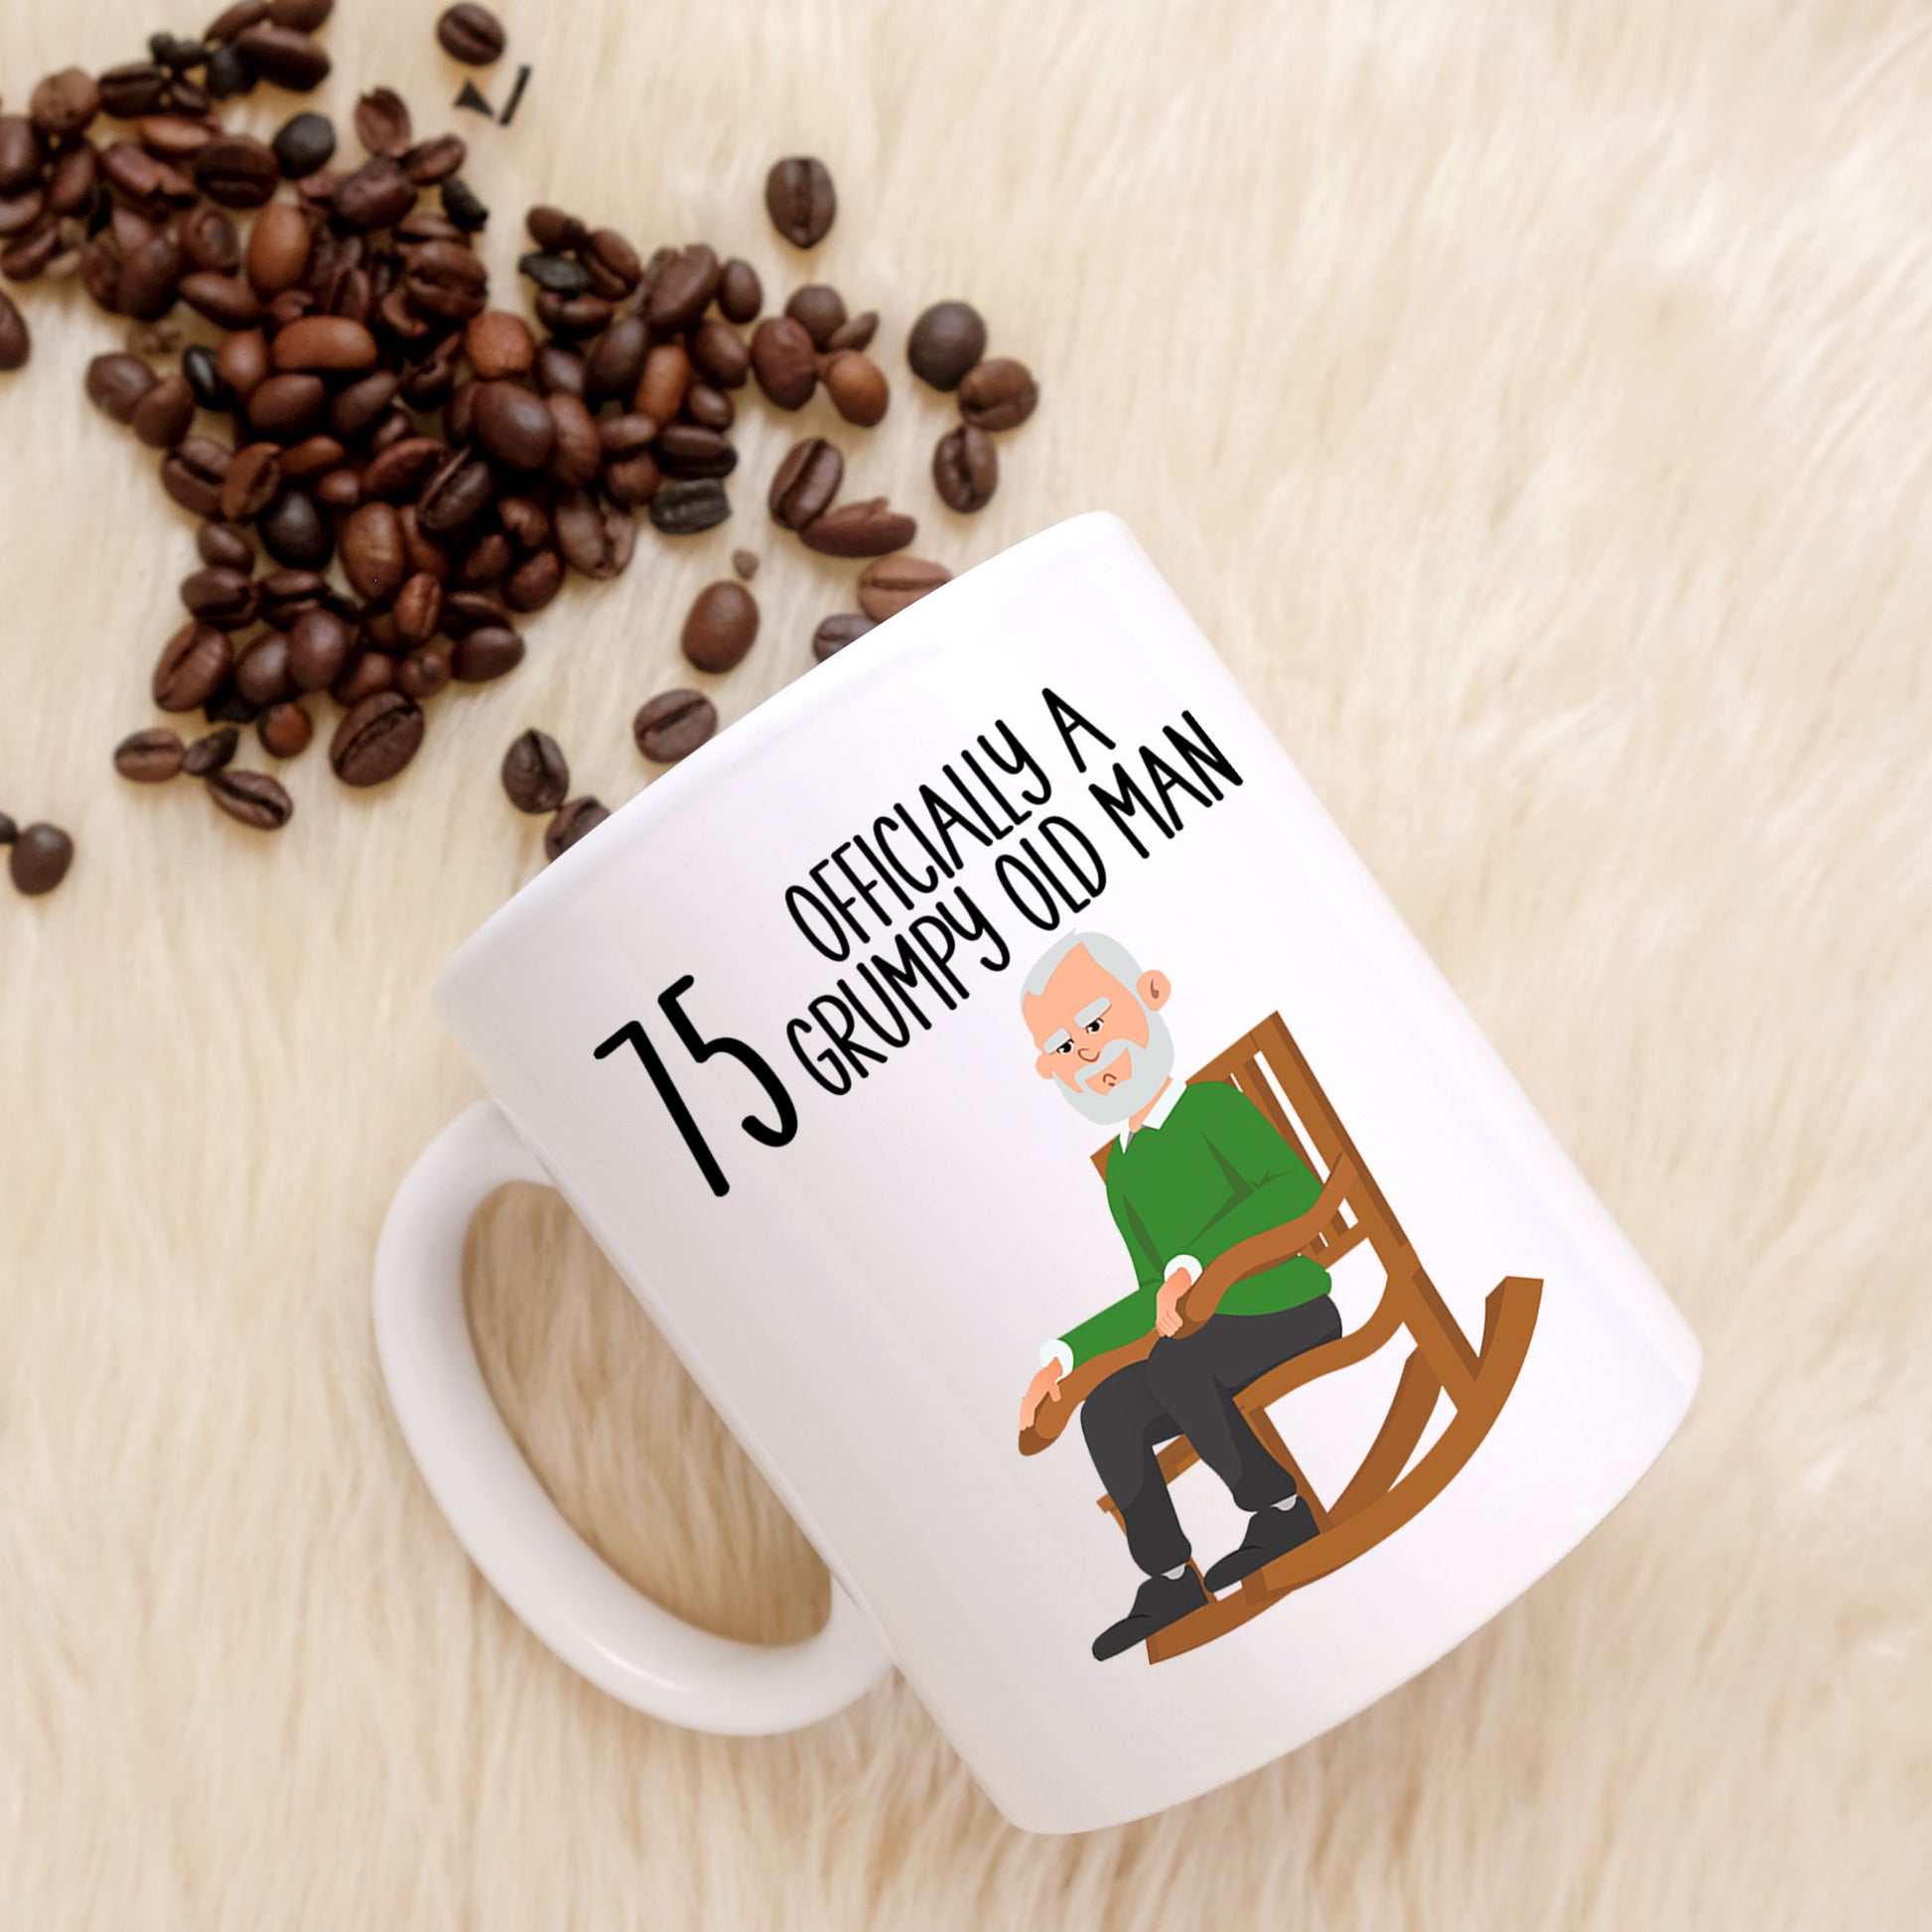 75 Officially A Grumpy Old Man Mug and/or Coaster Gift  - Always Looking Good -   